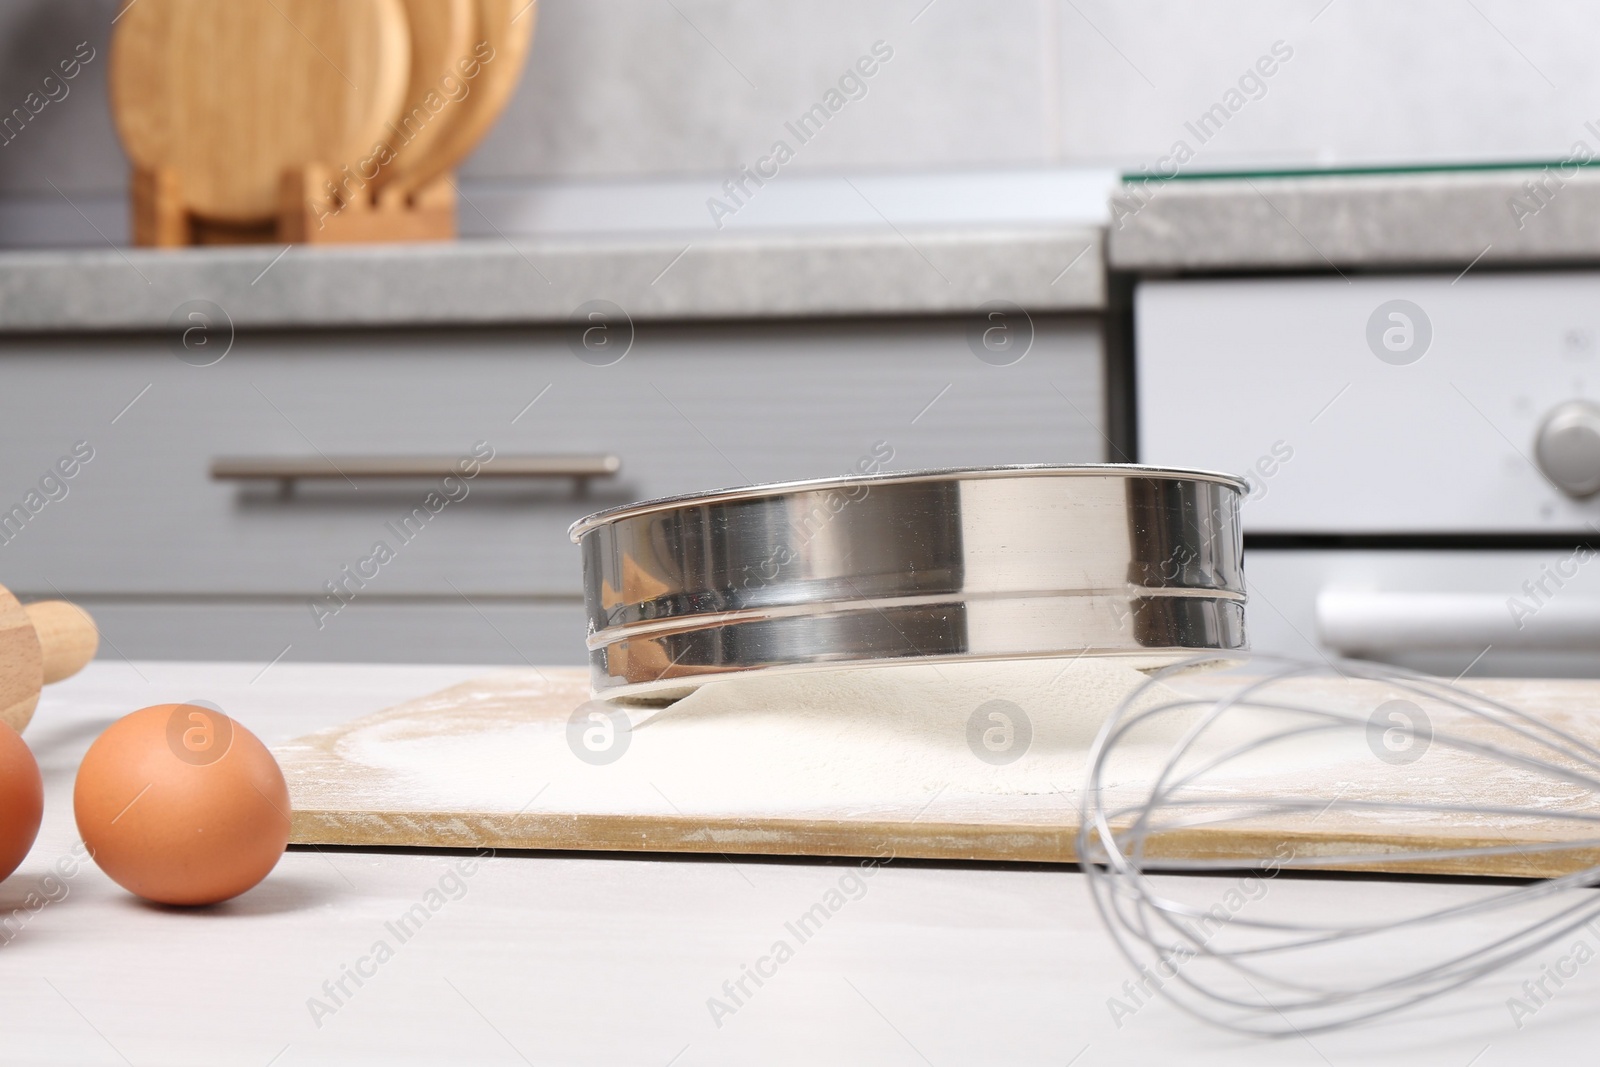 Photo of Sieve with flour, eggs, whisk and rolling pin on table in kitchen